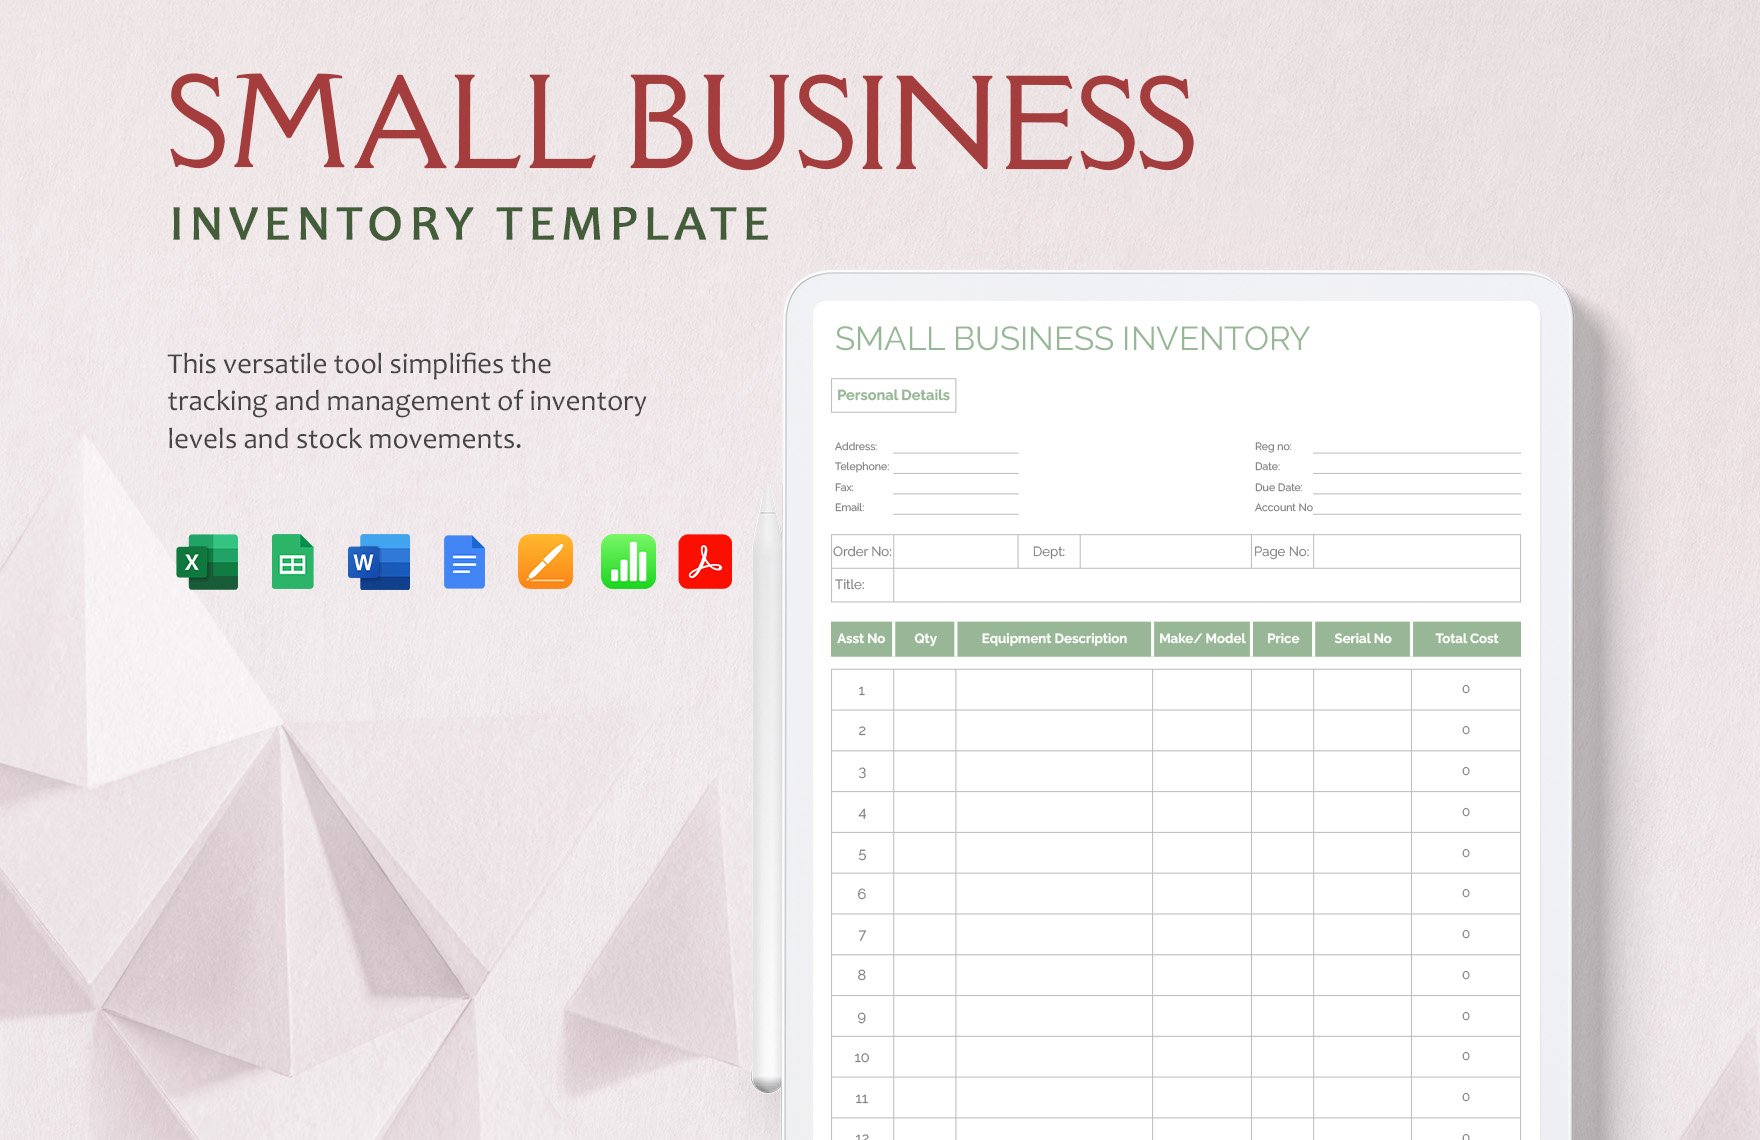 Small Business Inventory Template